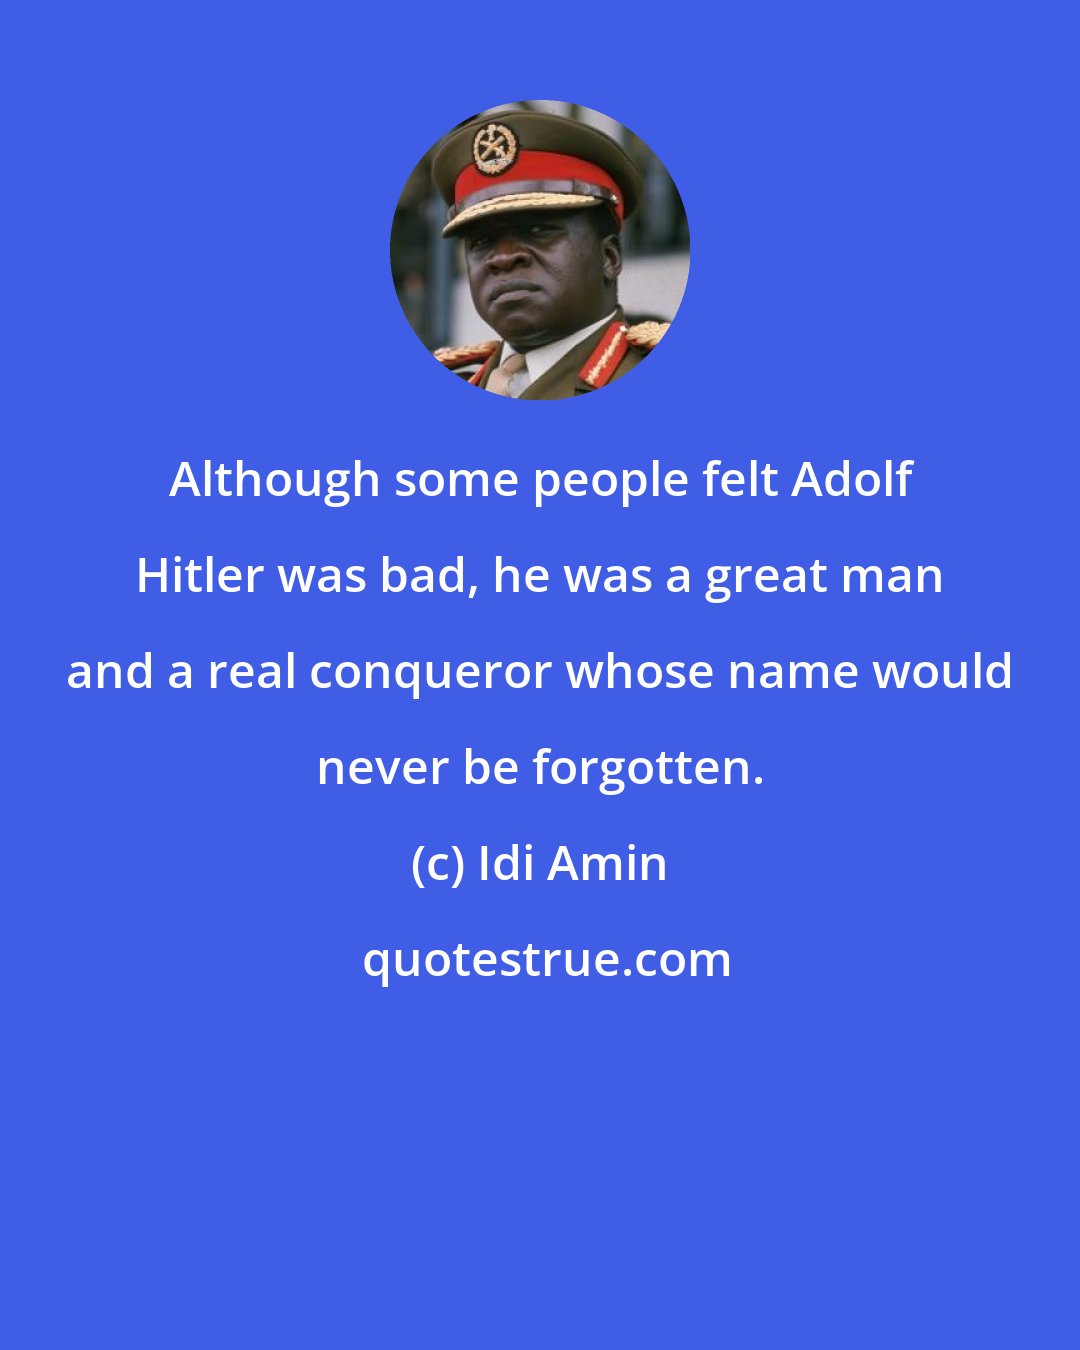 Idi Amin: Although some people felt Adolf Hitler was bad, he was a great man and a real conqueror whose name would never be forgotten.